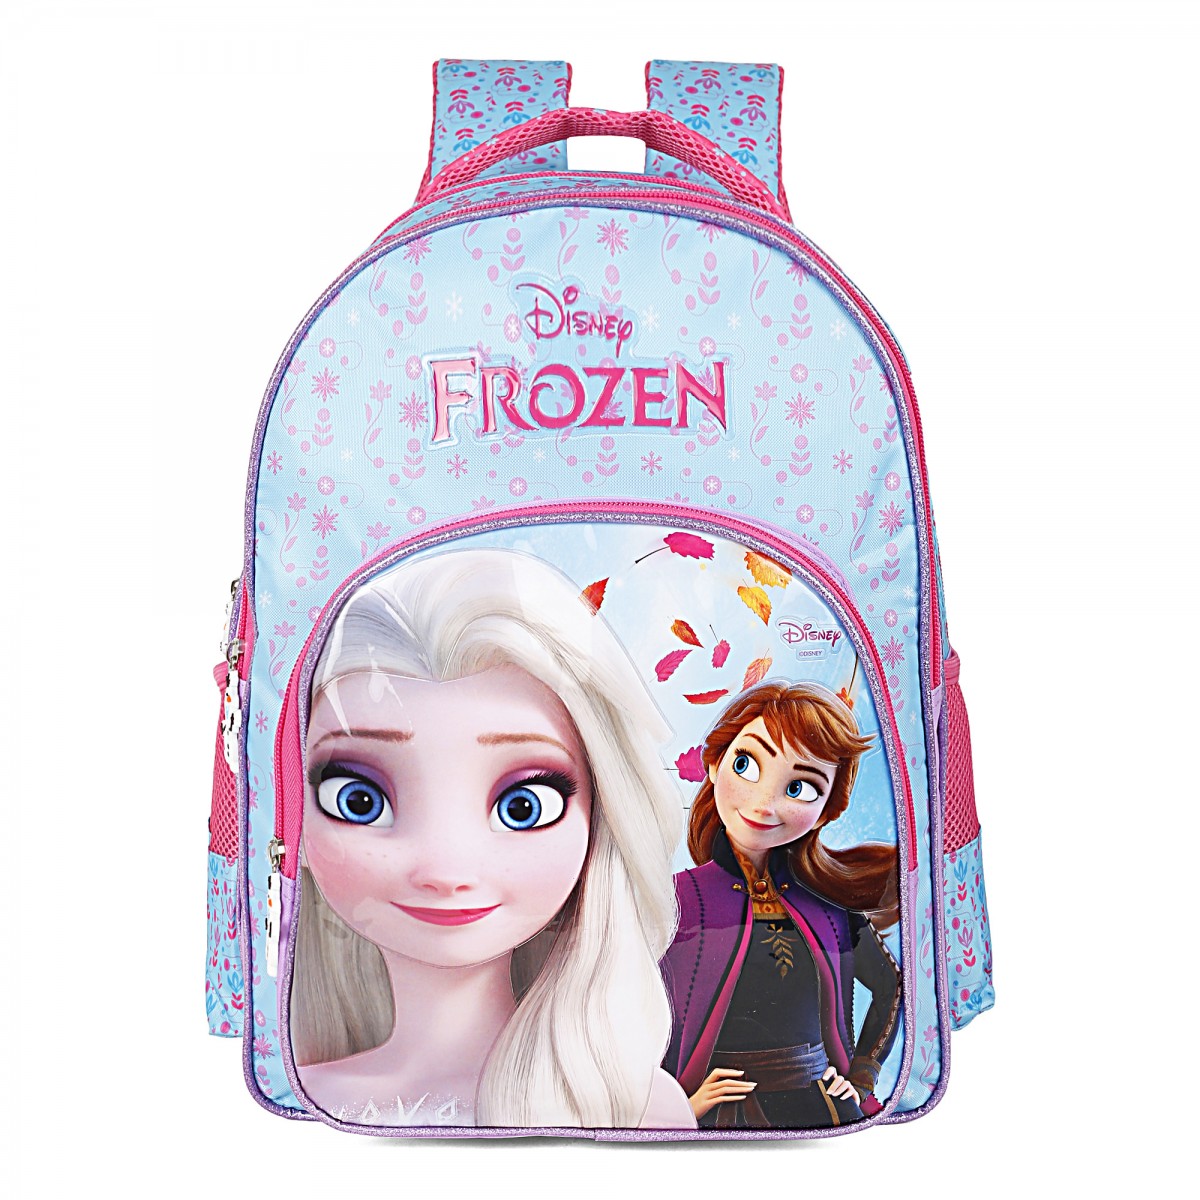 Striders Frozen Sisters School Bags, Cartoon Character Backpack best for Girls, Kids for 5Y+, Multicolour